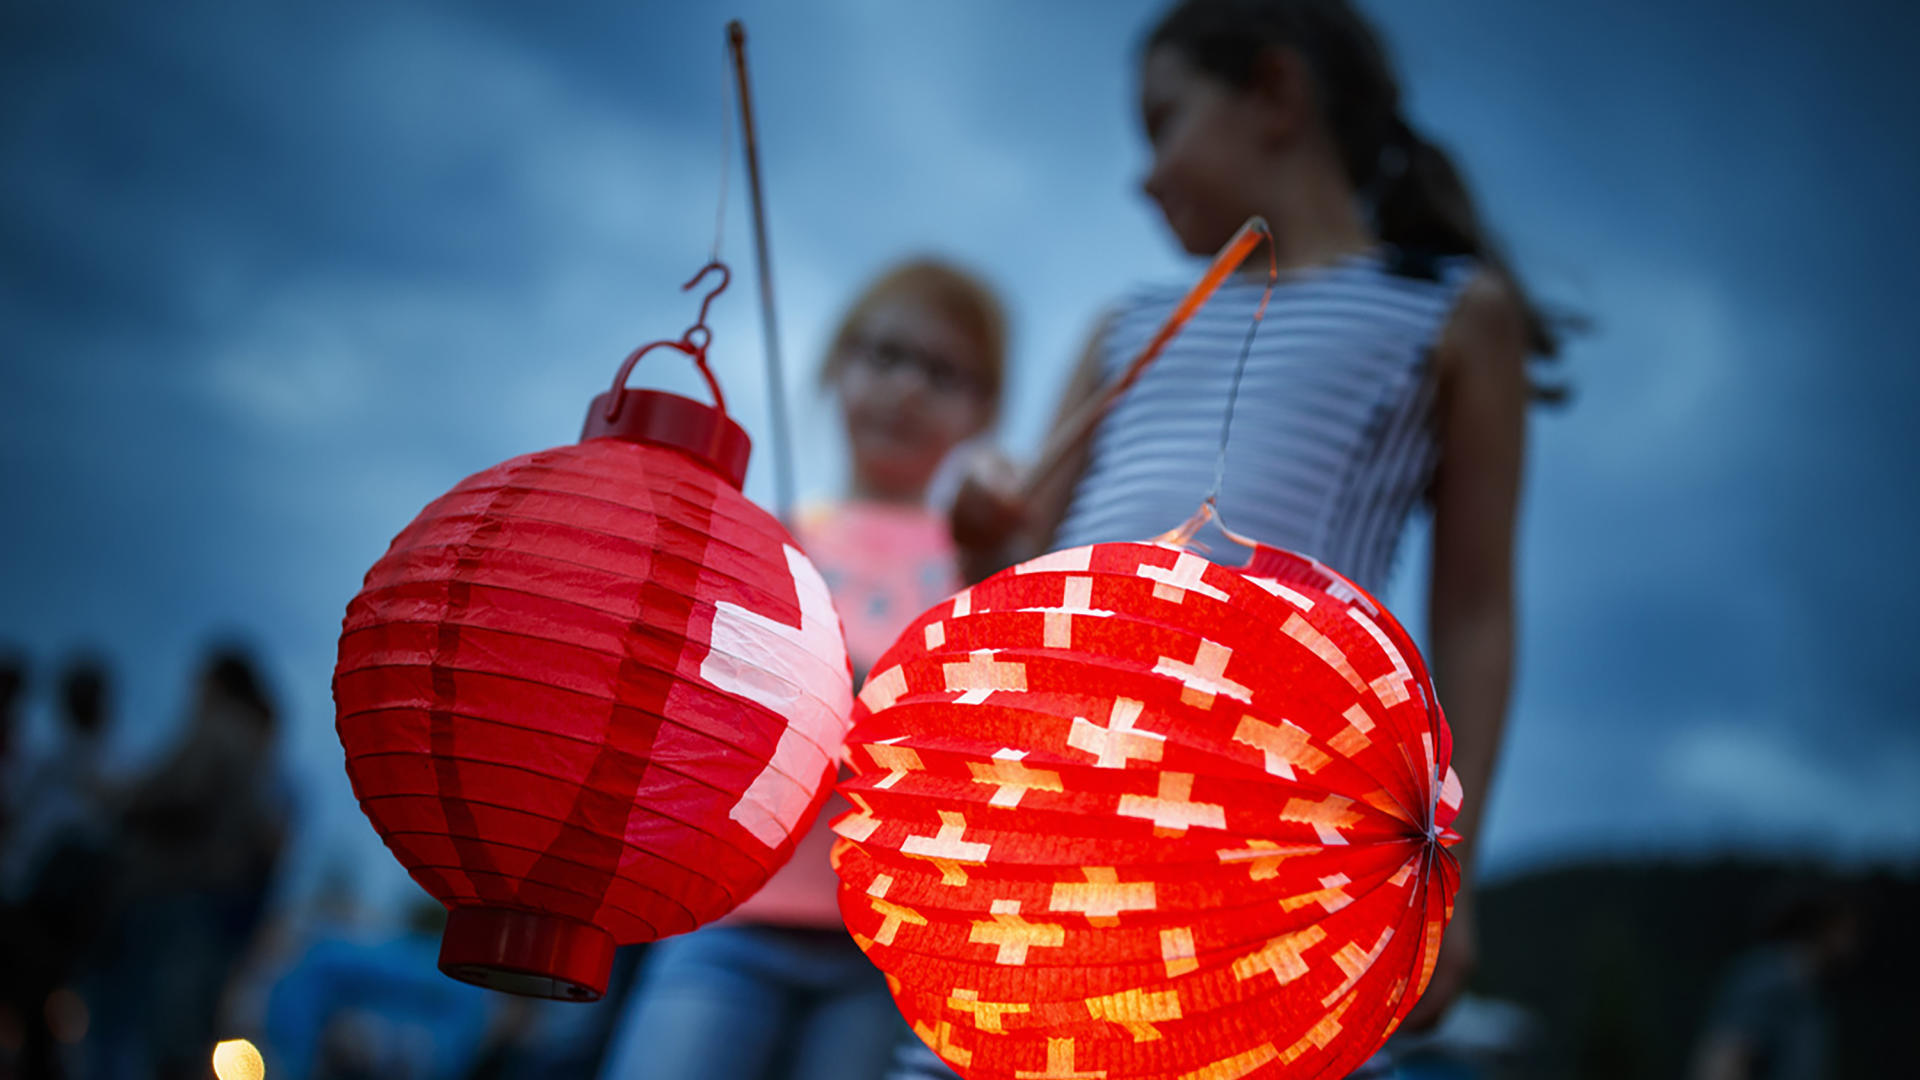 Two girls holding paper lanterns at dusk when celebrating the national holiday on 1 August.